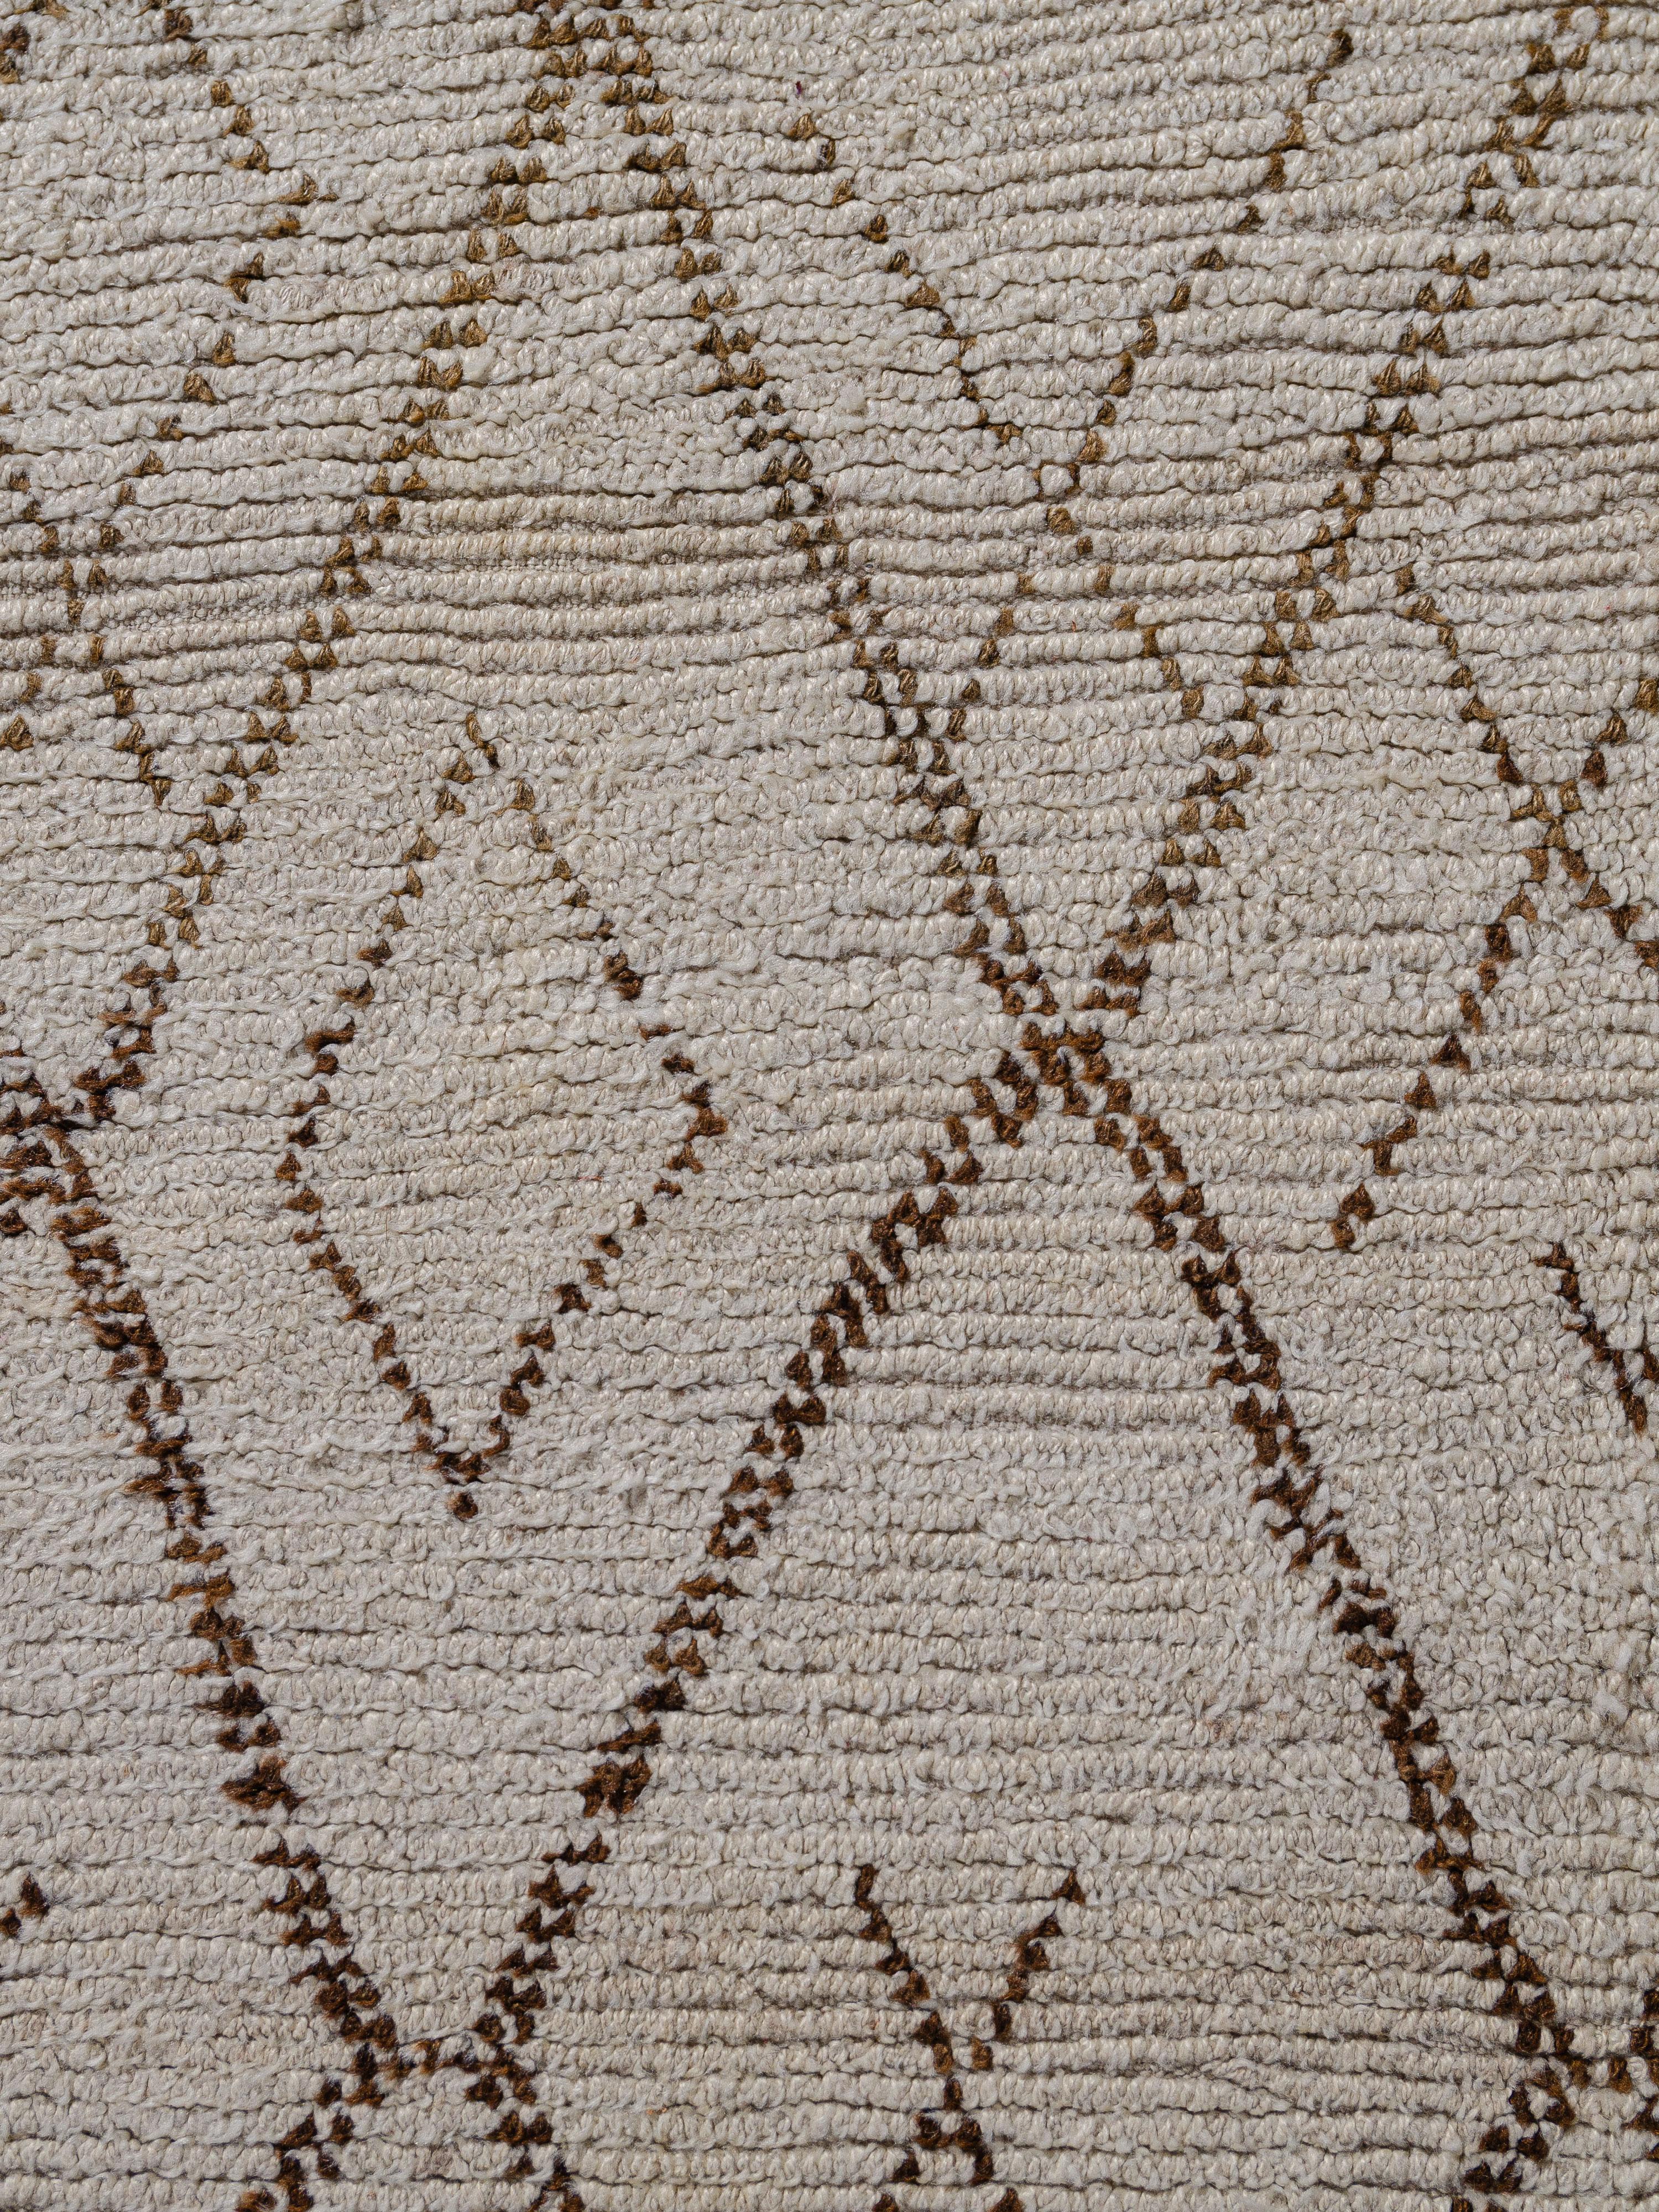 Full of character with its asymmetry and unusual proportions, this vintage Beni Ouarain carpet exemplifies the spirit of handcraft found in Berber arts. The large feminine central lozenge motifs are flanked by an offset male branch forming a moment